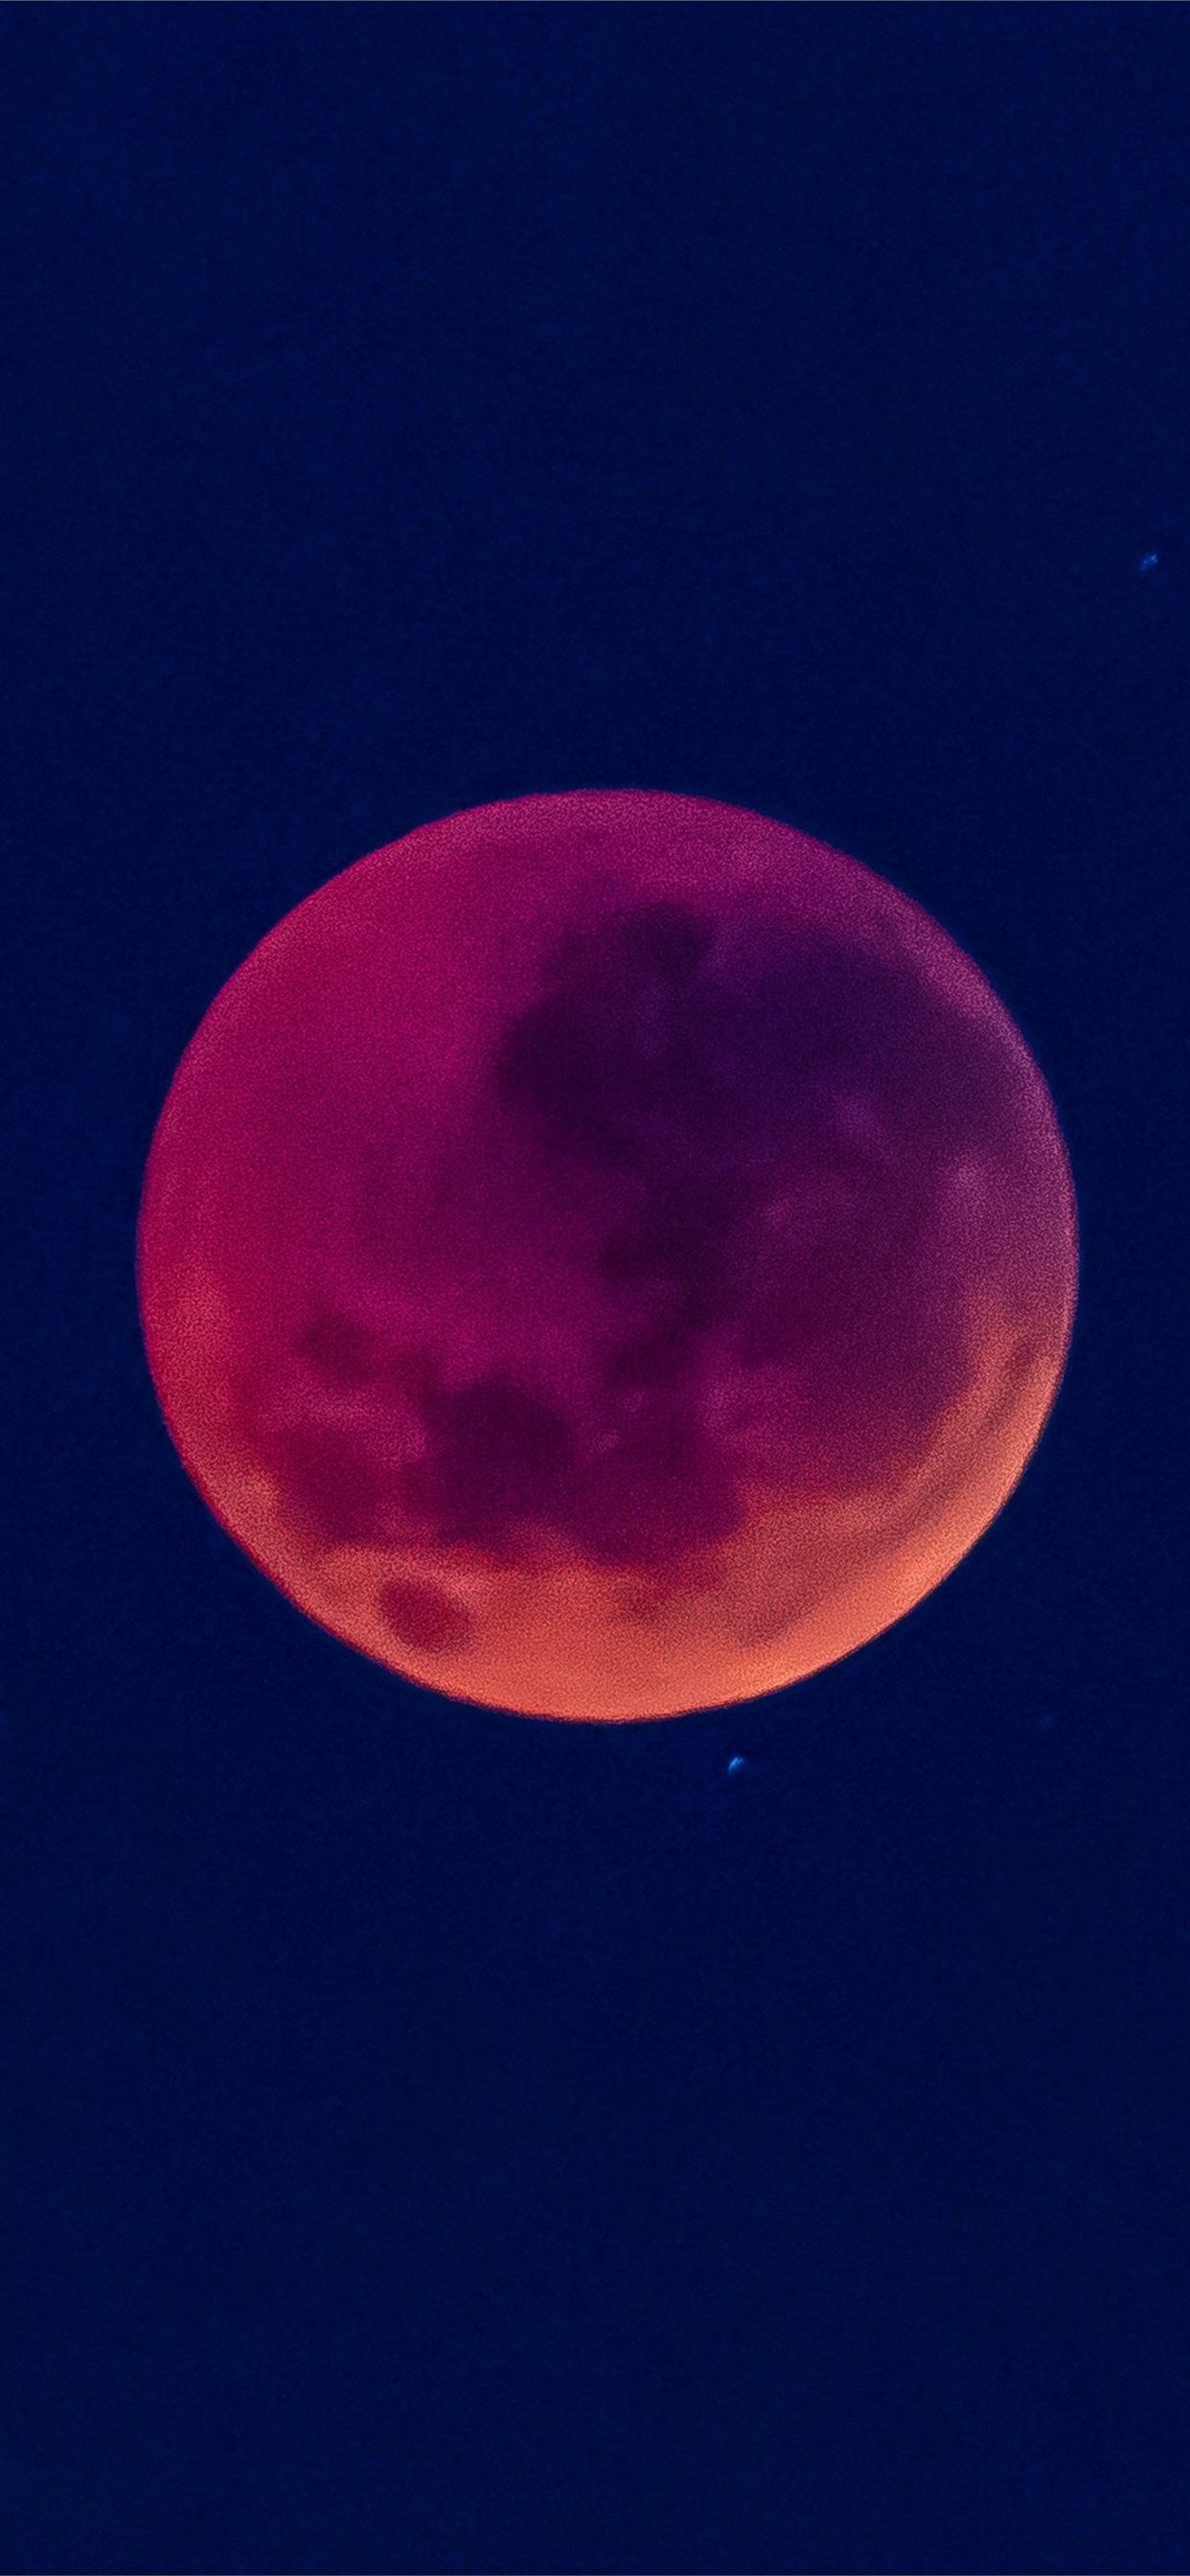 blood red moon in blue sky iPhone X Wallpaper Free Download